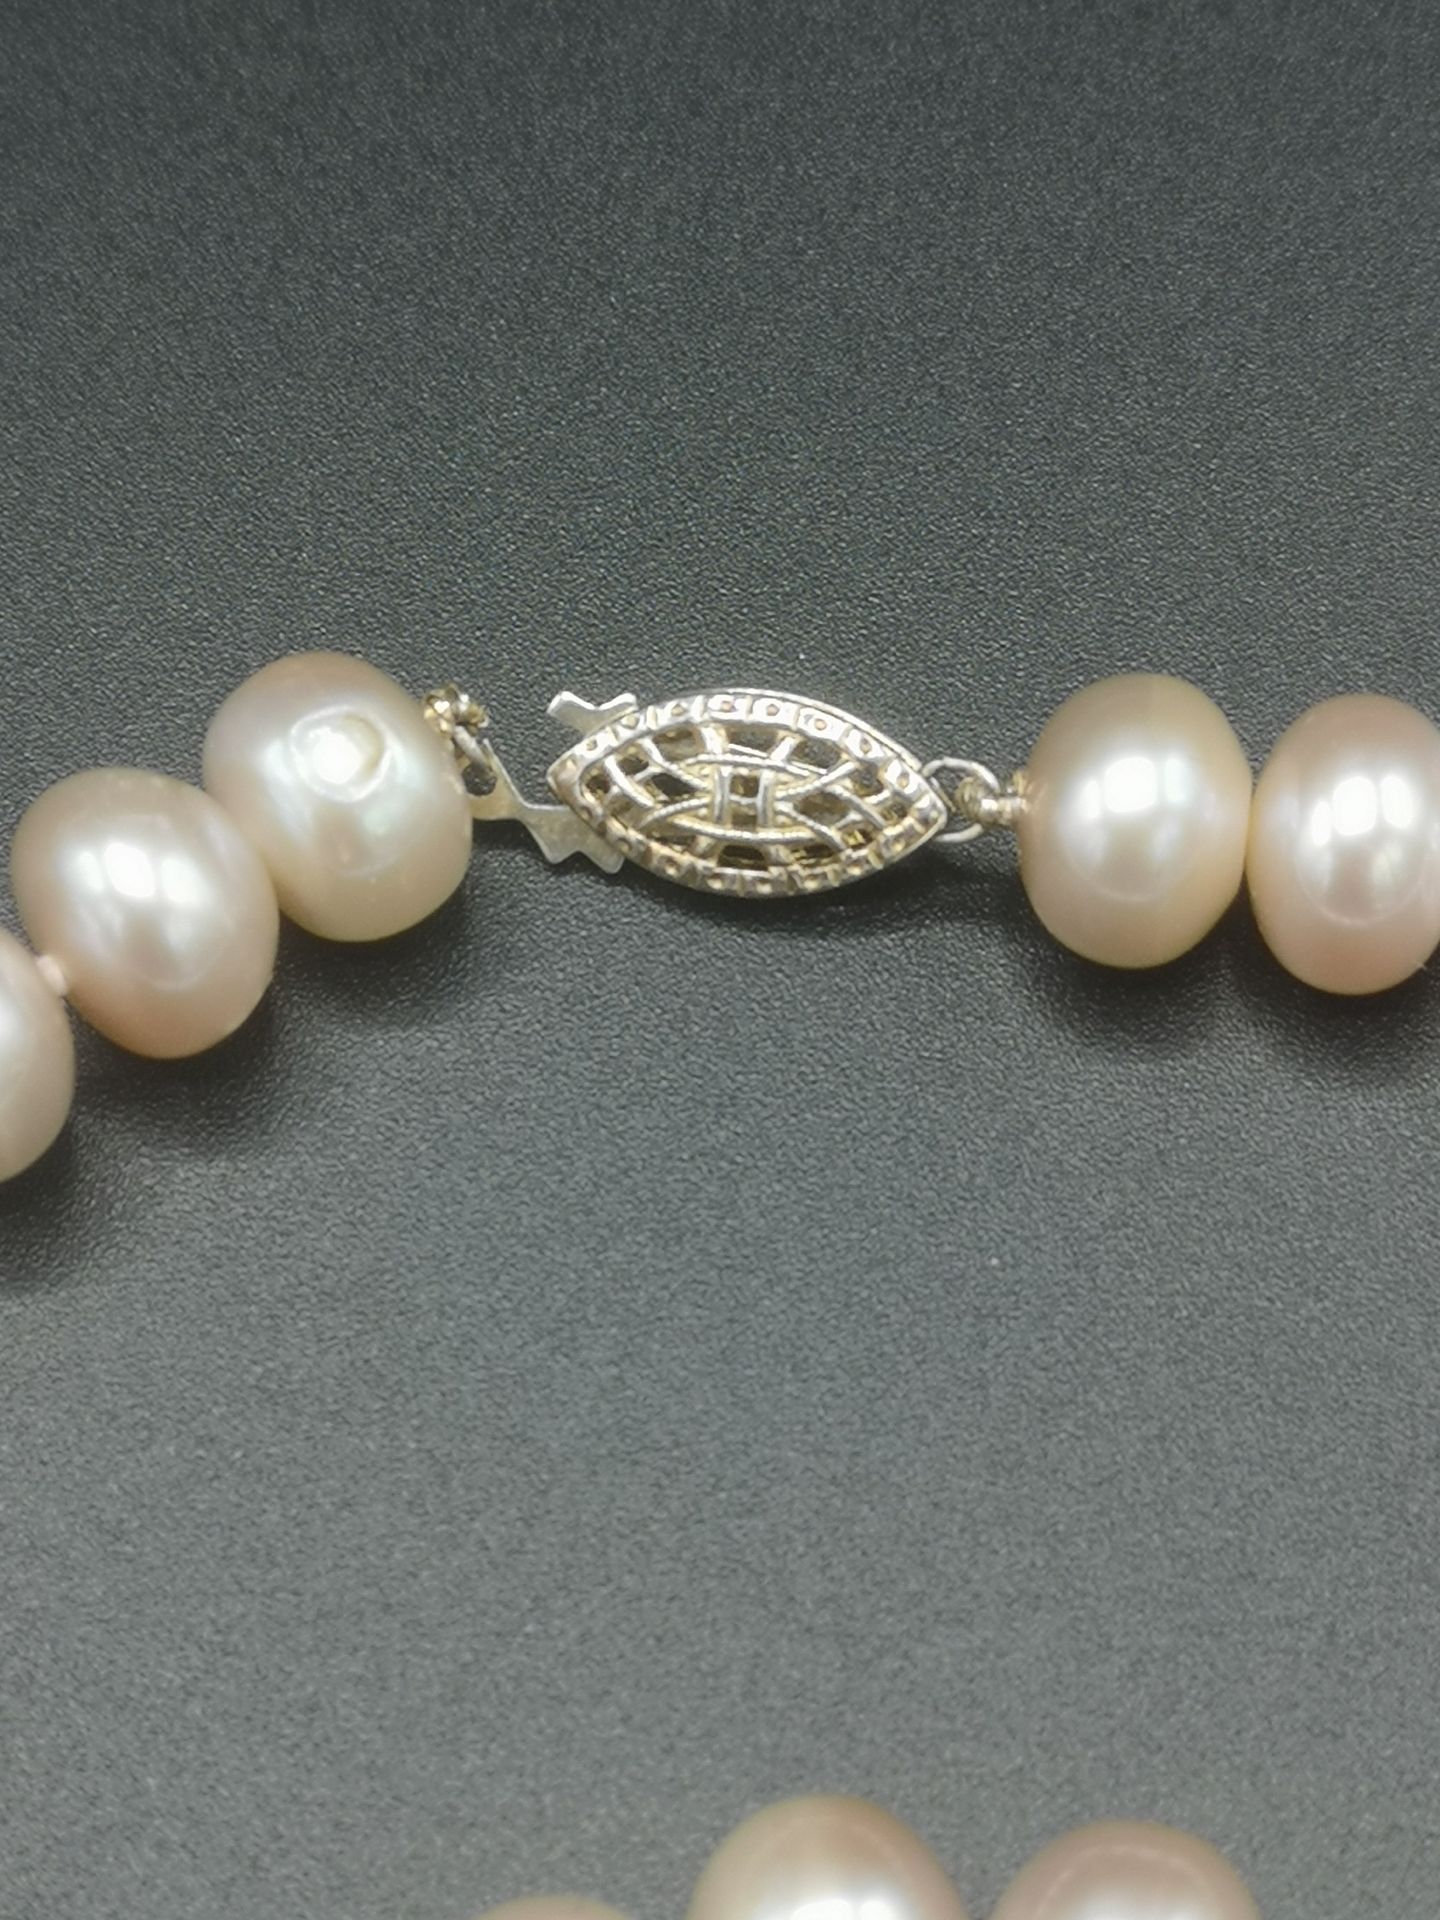 Pearl necklace with matching bracelet - Image 4 of 5